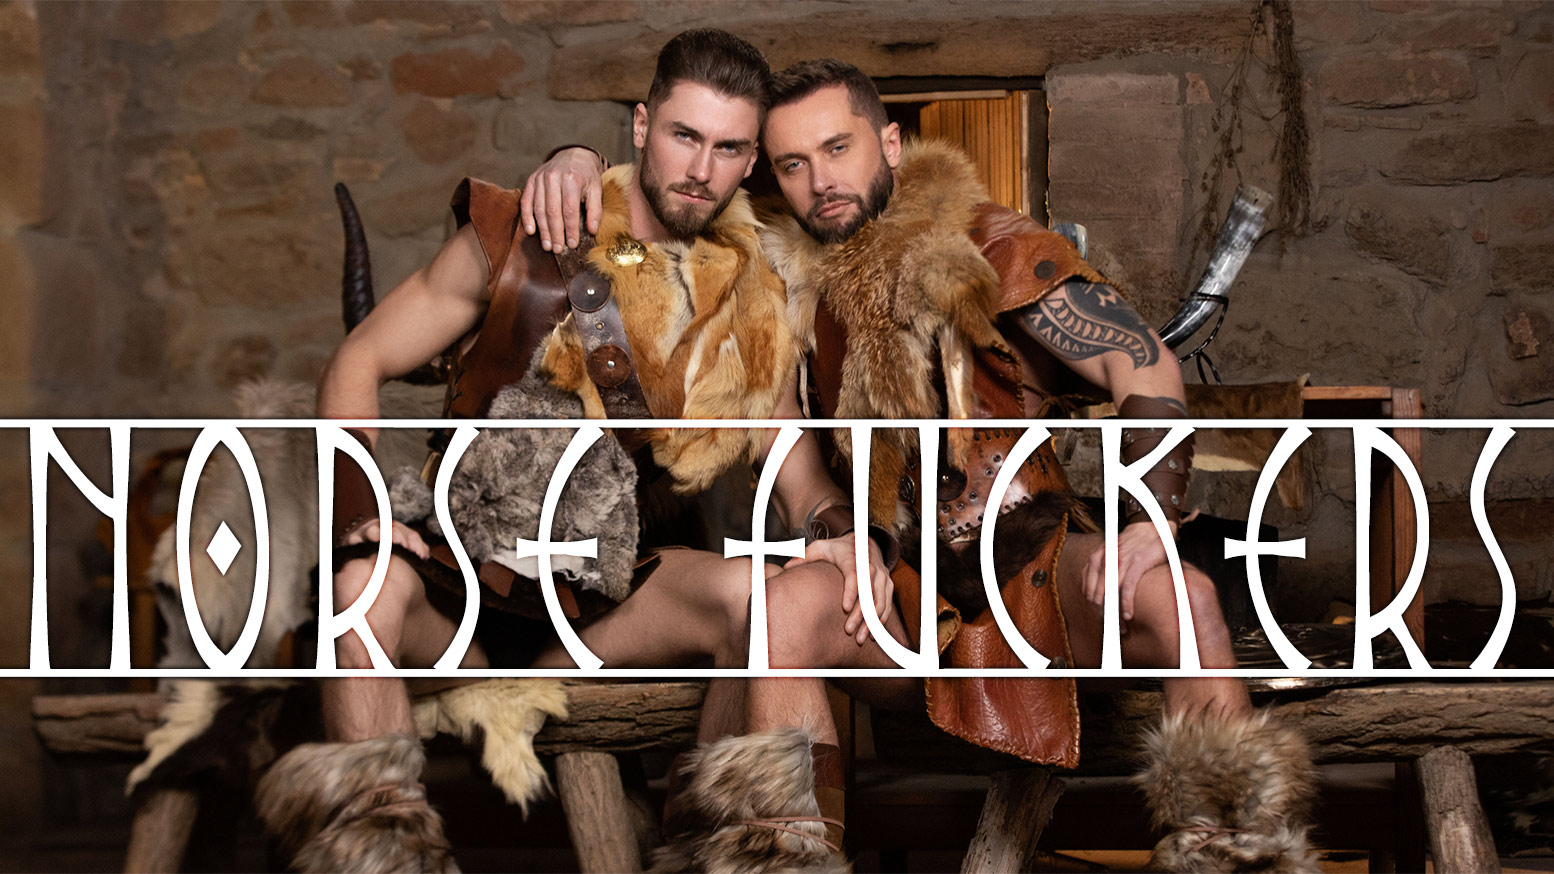 MEN Tyler Berg and Craig Marks in Norse Fuckers, Part 1